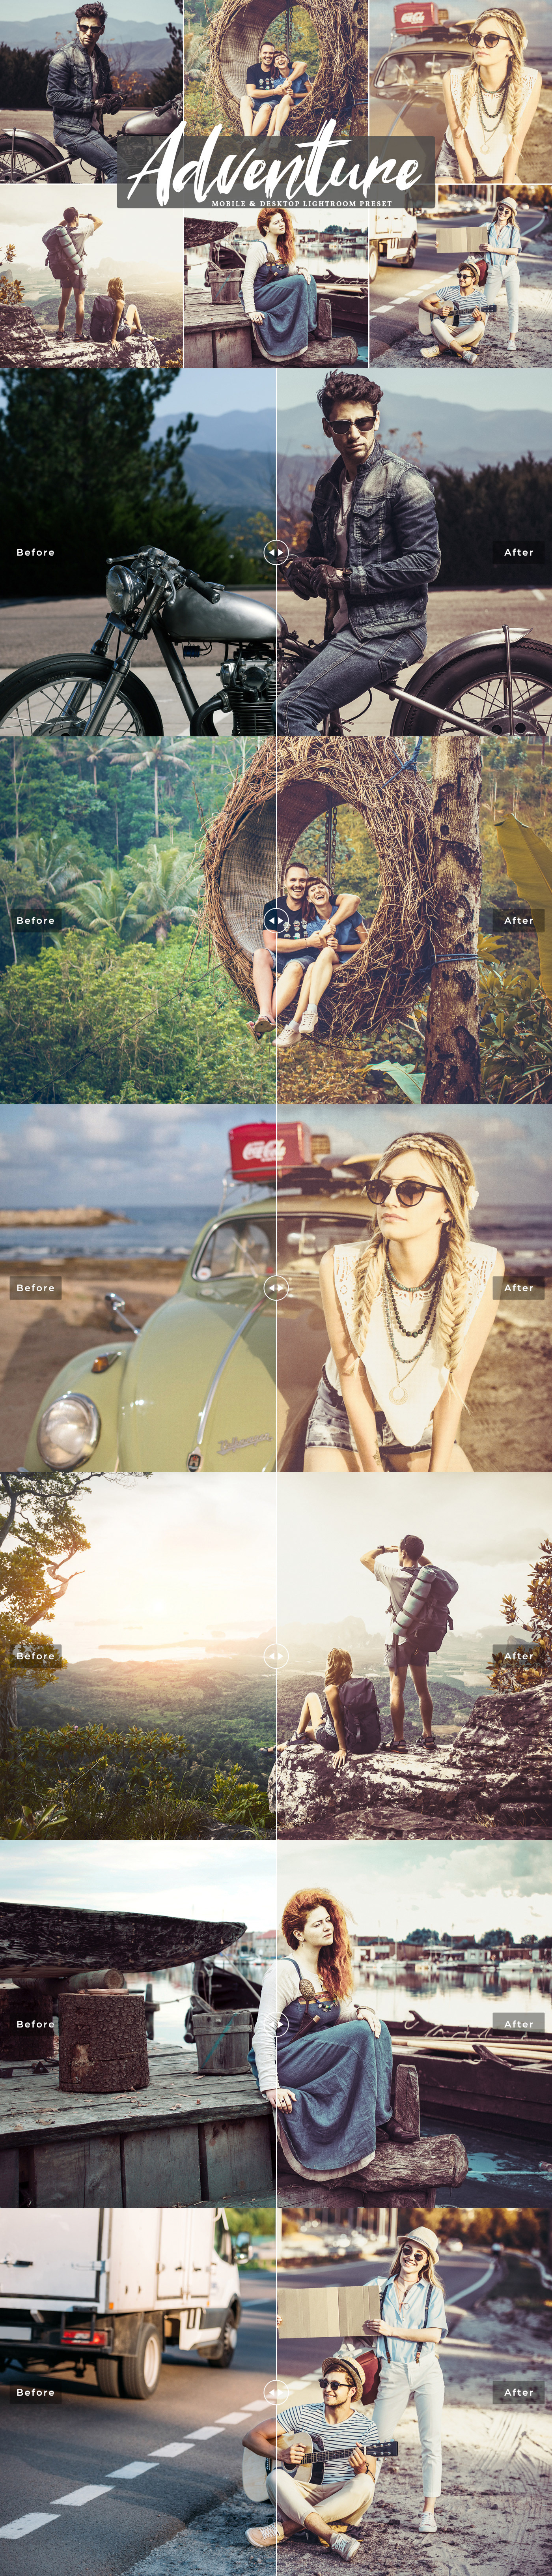 acr presets aesthetic airy preset blogger blogger preset presets bright couple dreamy presets engagement presets